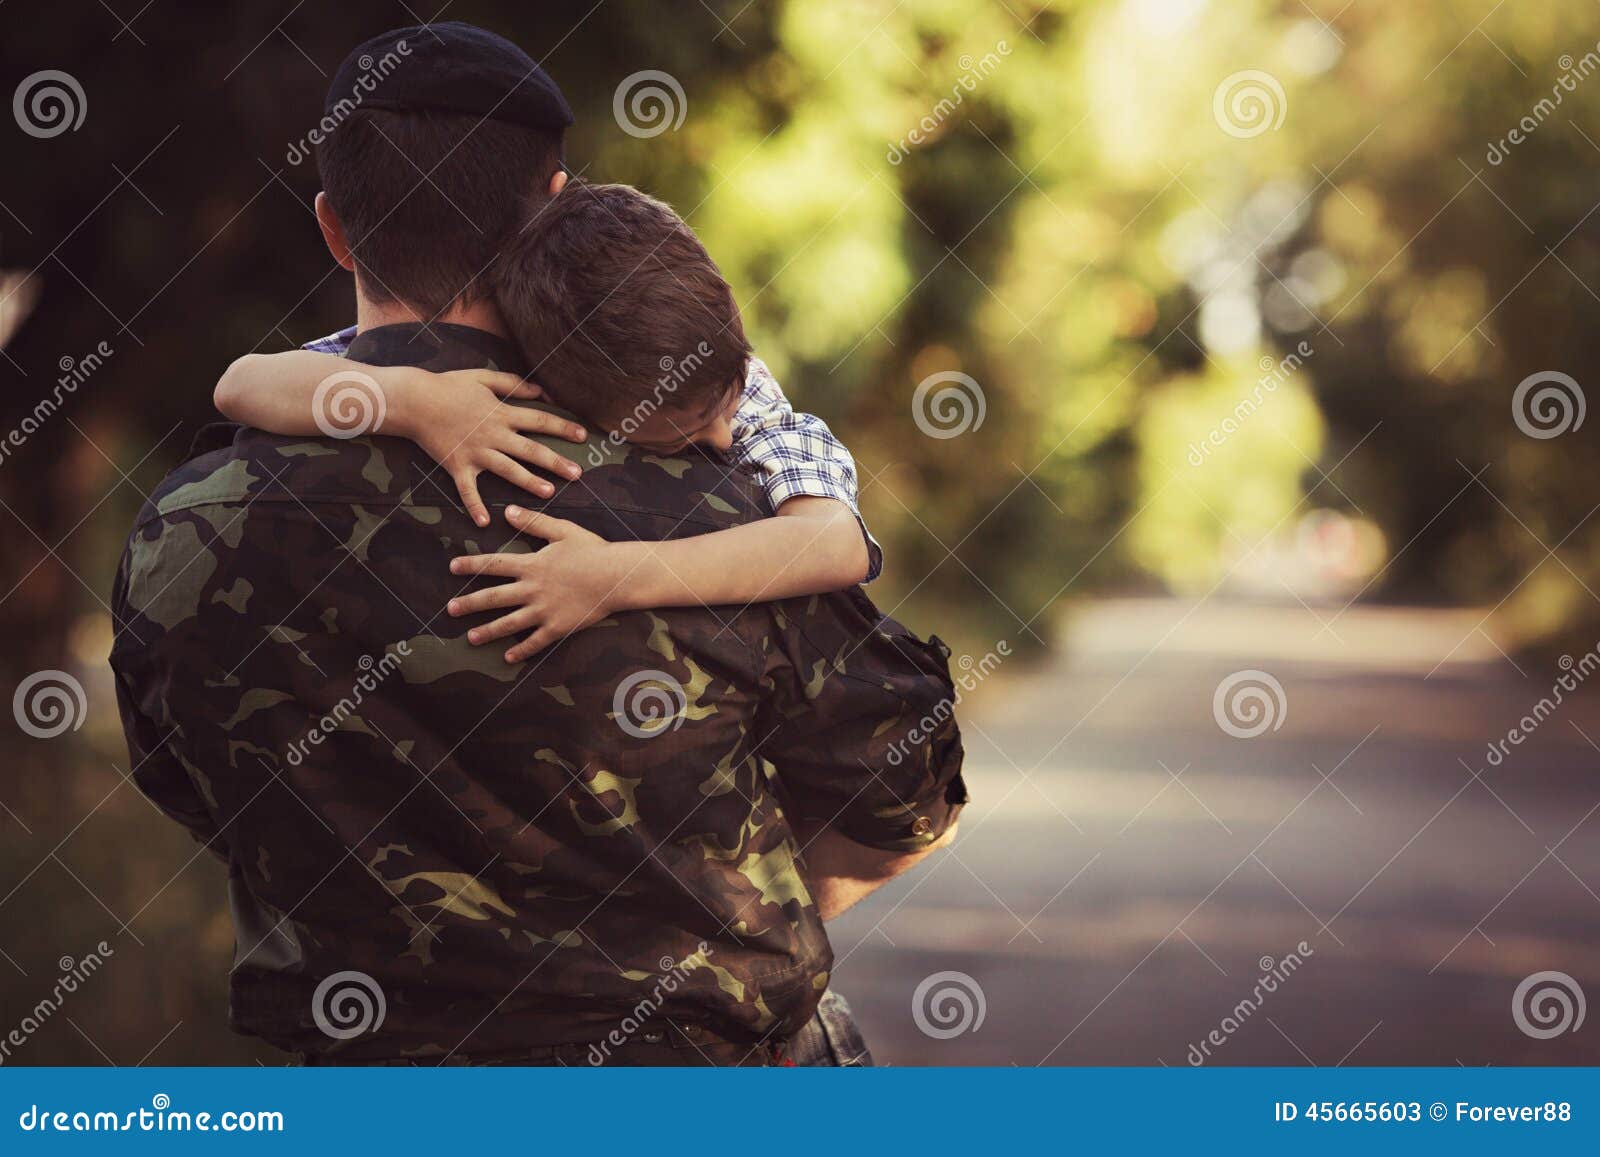 Boy and Soldier in a Military Uniform Stock Image - Image of ...